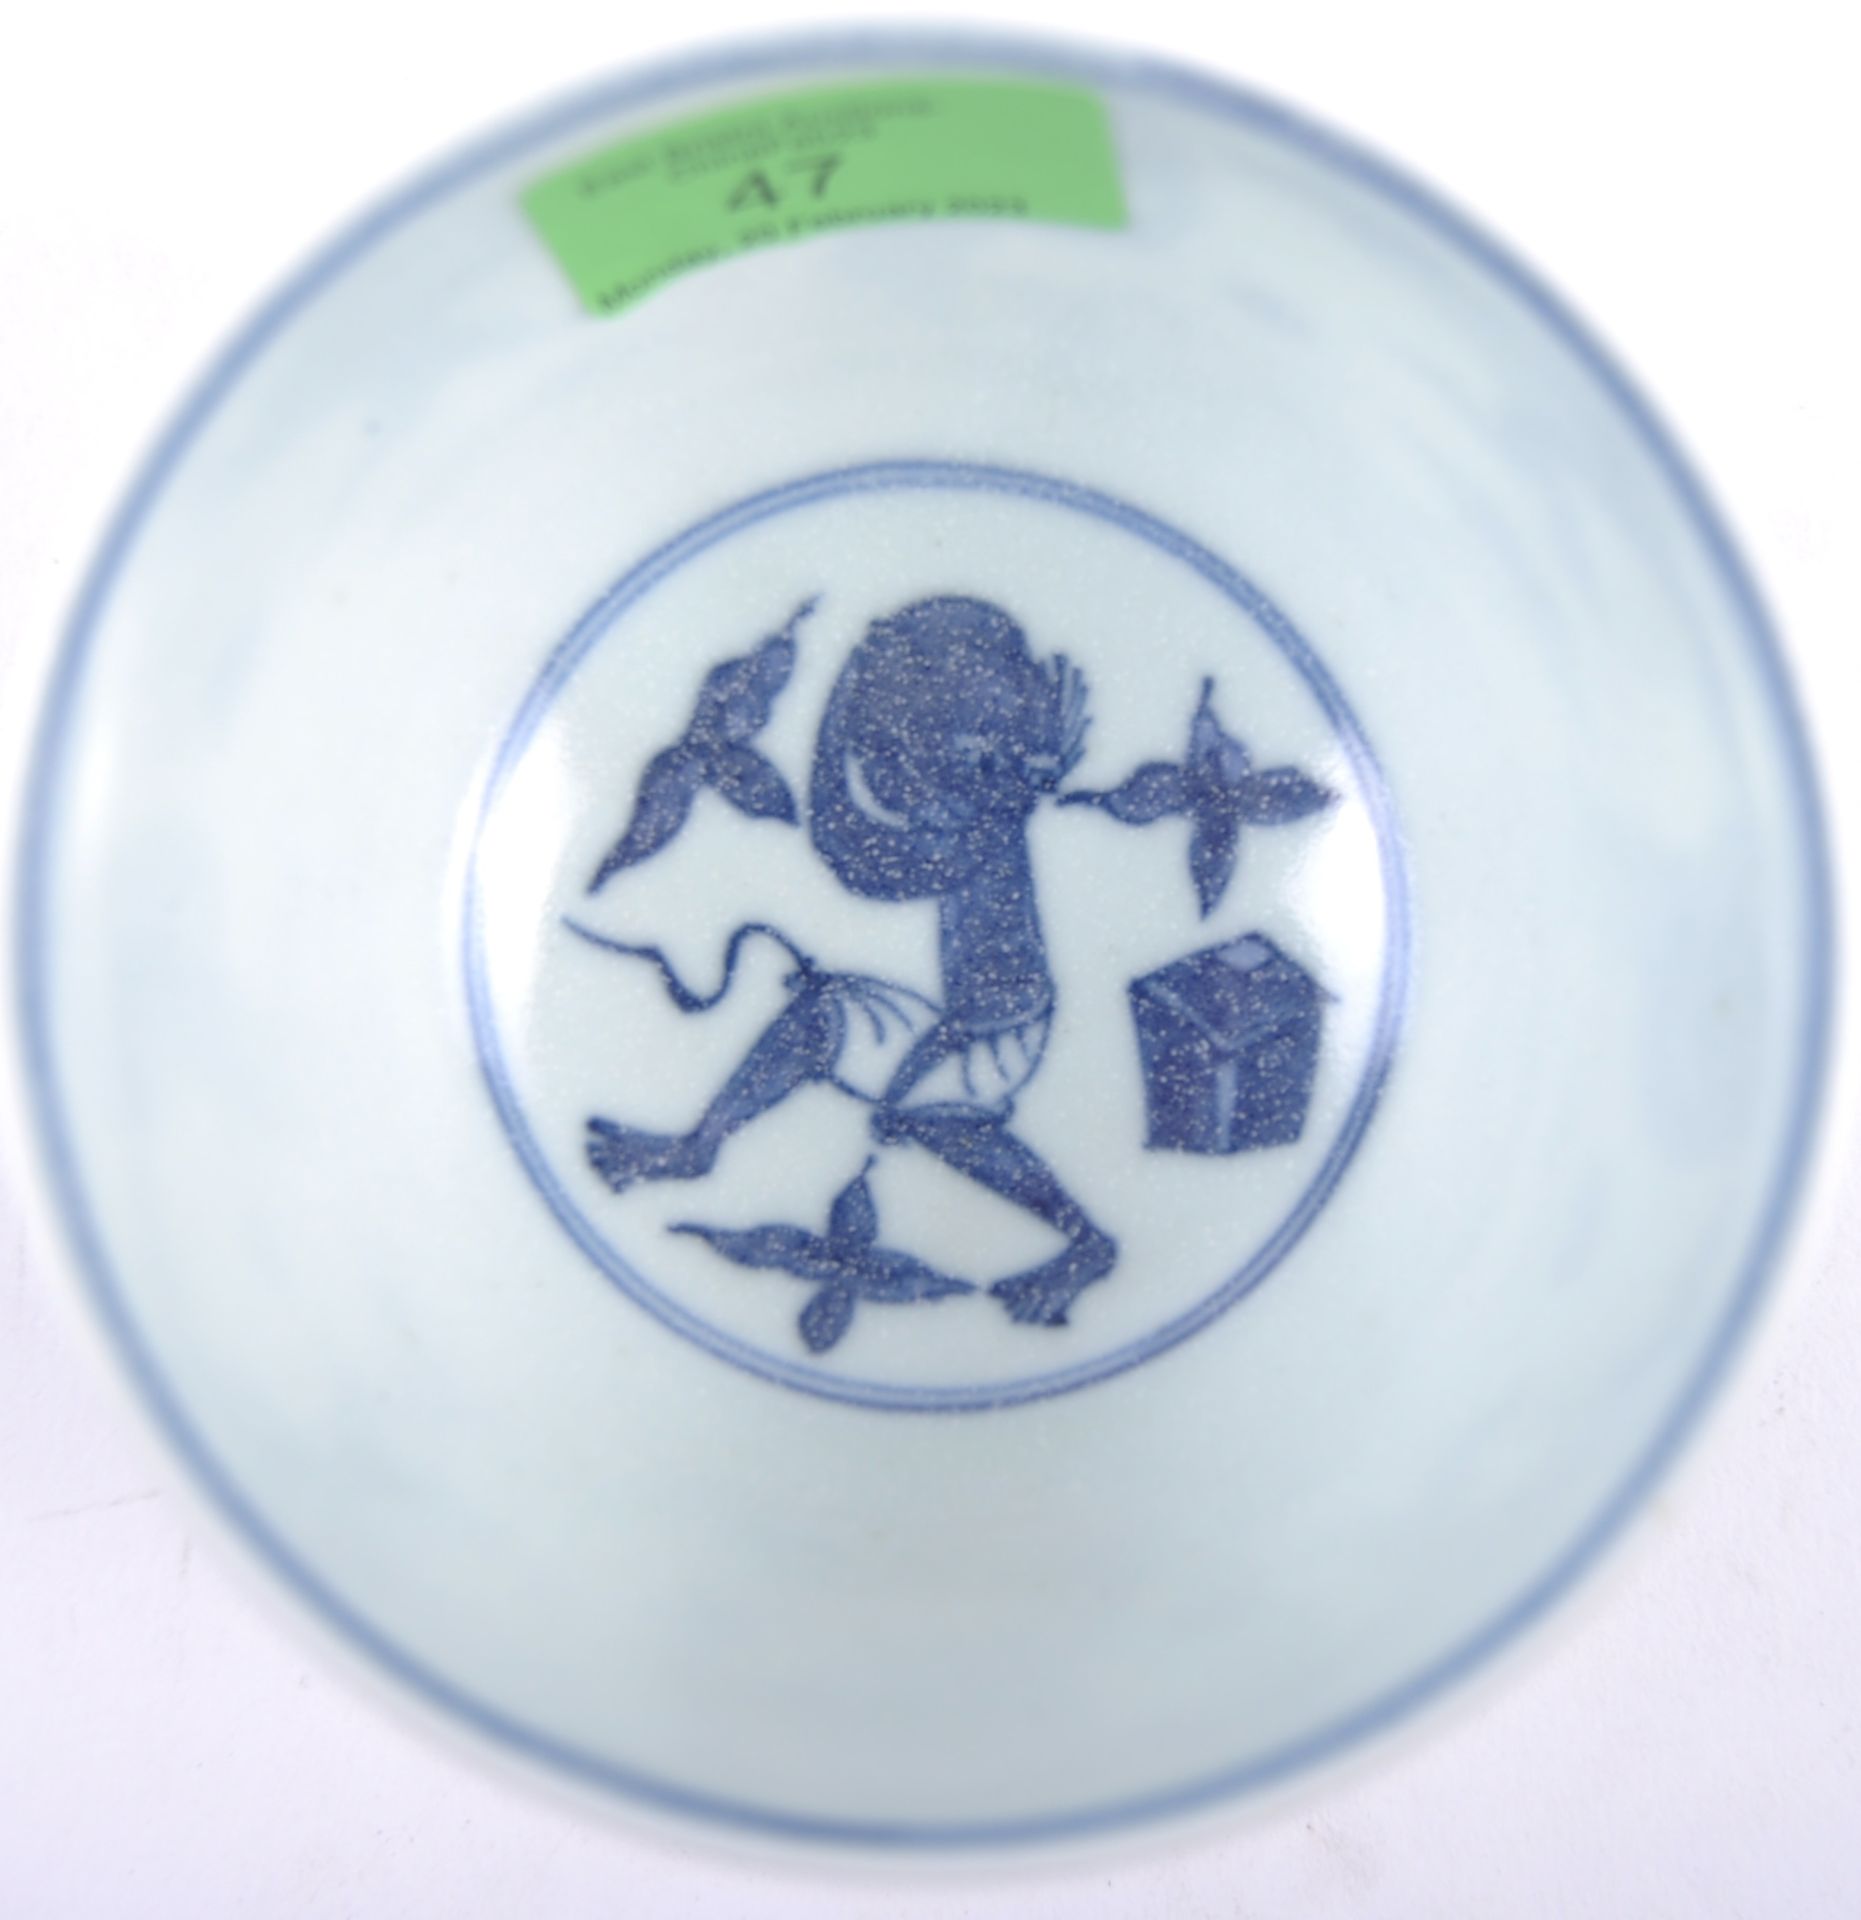 20TH CENTURY CHINESE MING MARK BOWL - Image 7 of 7